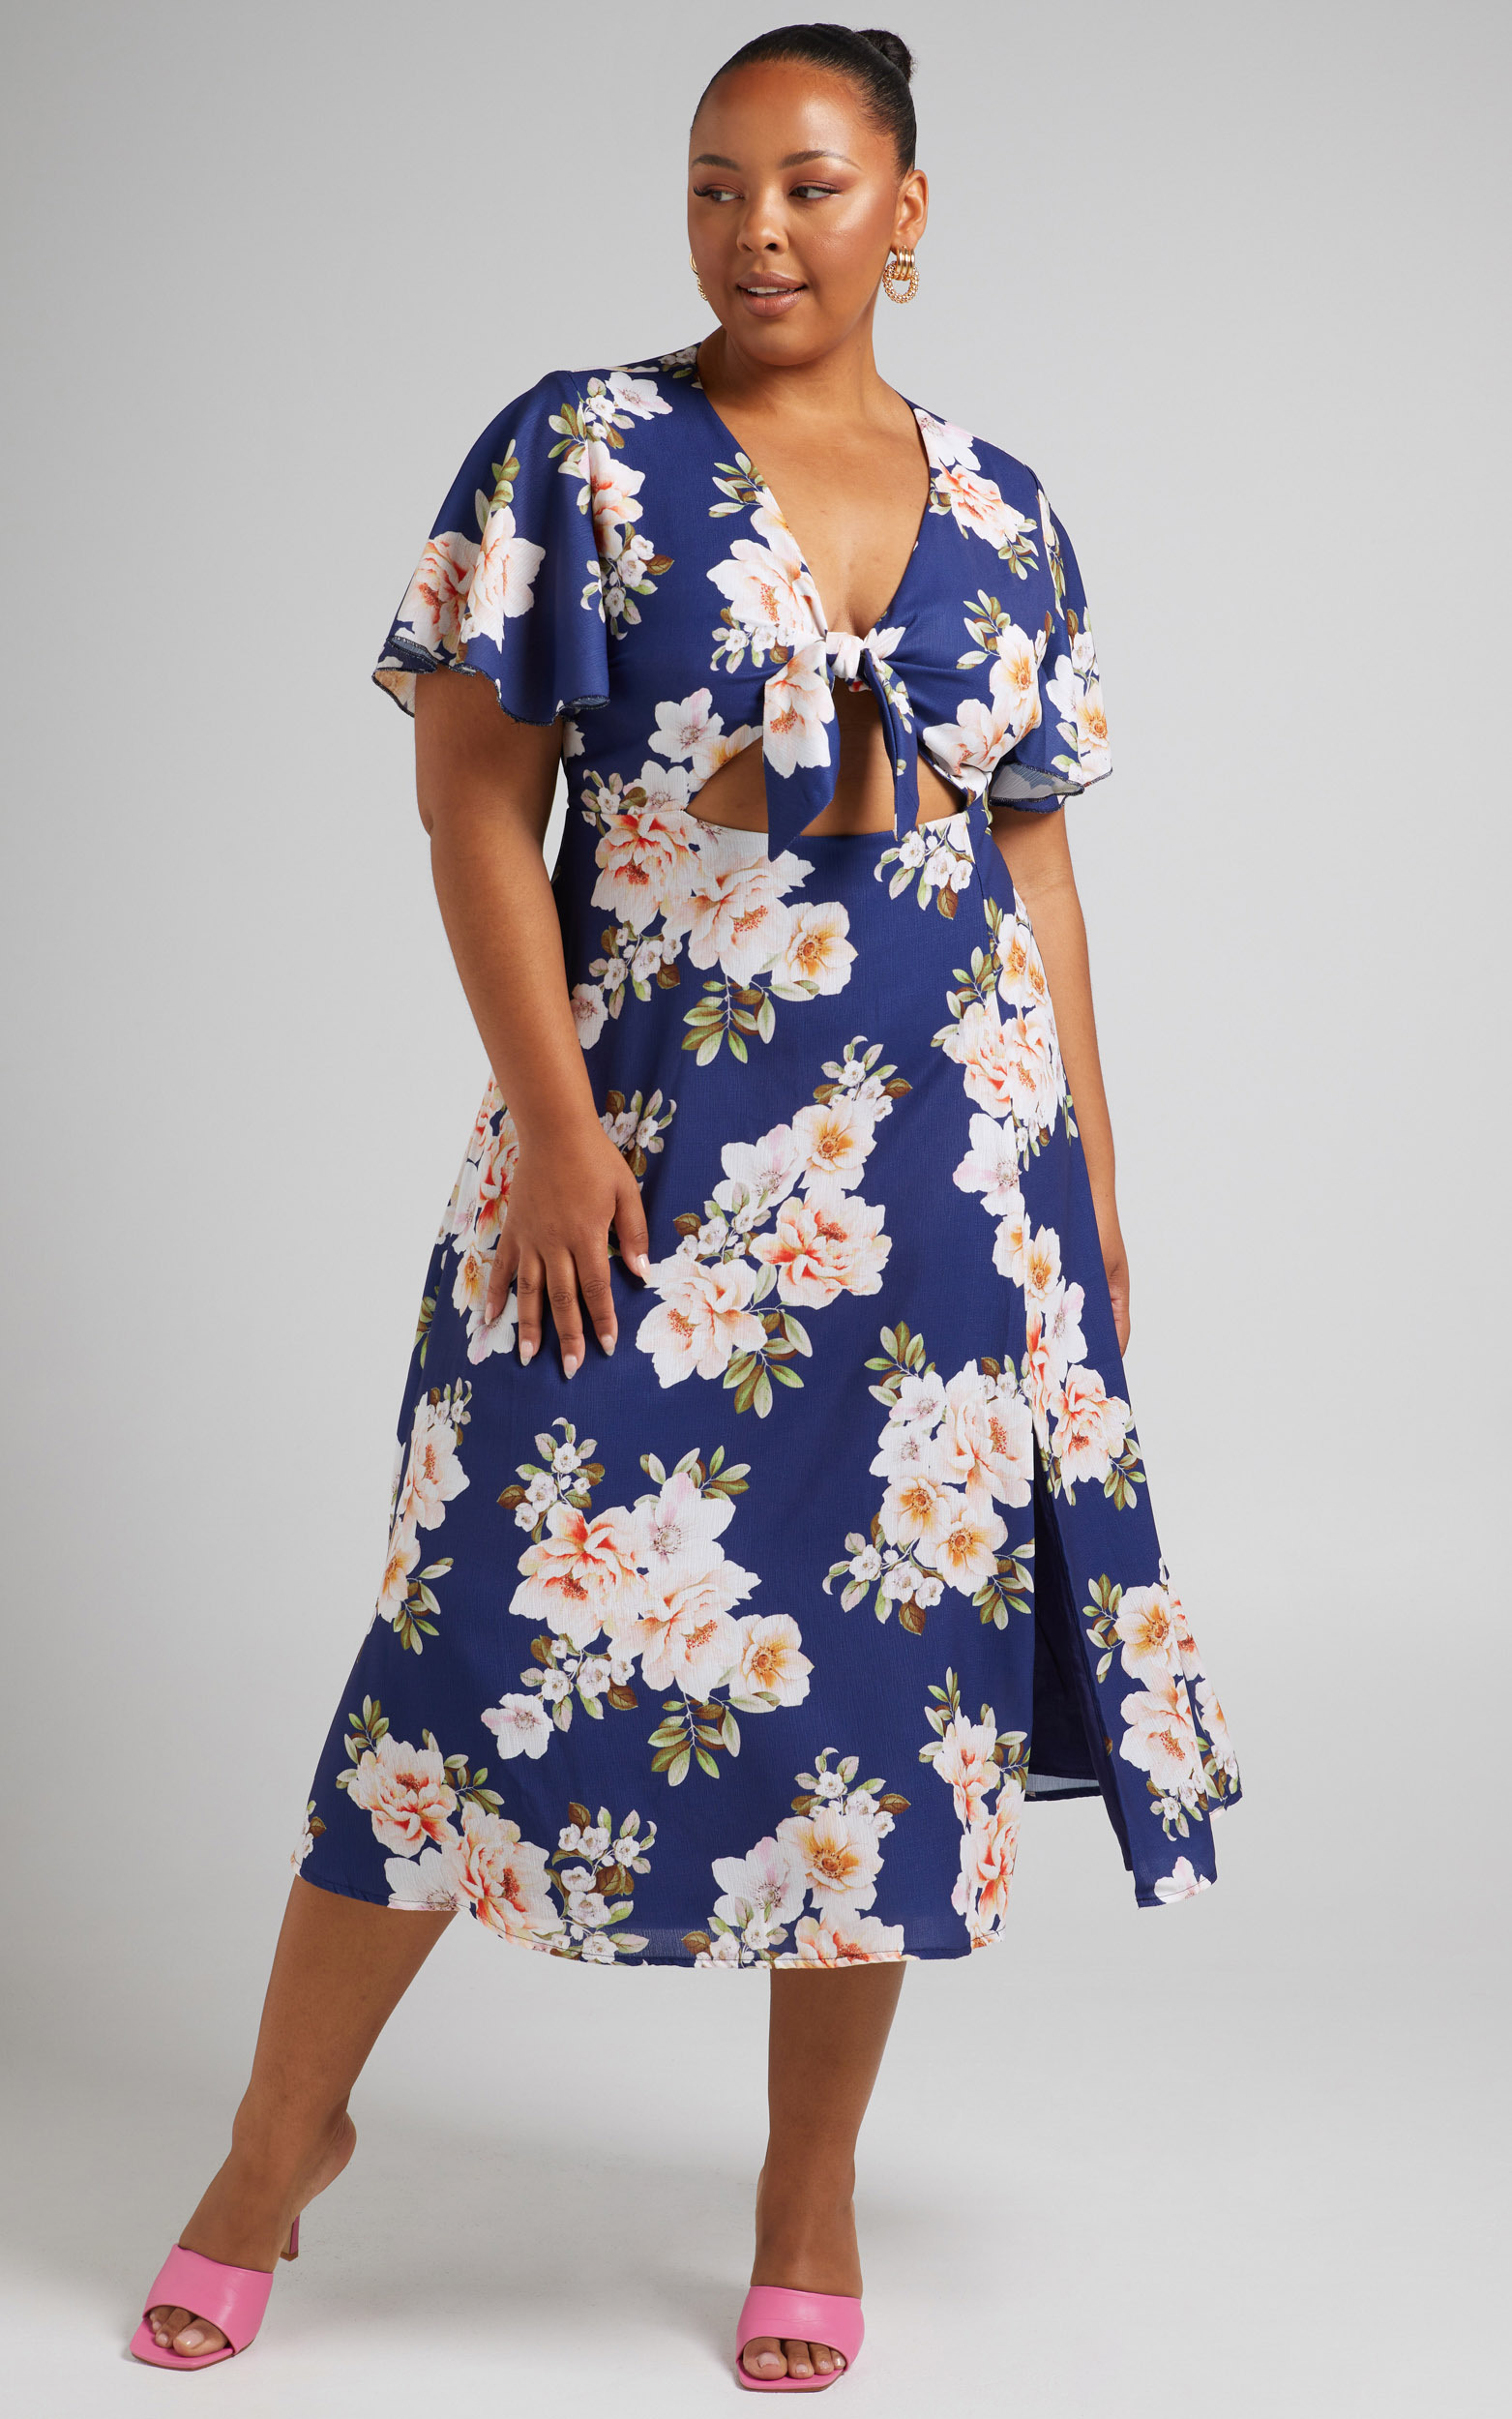 Wild And Free Mind Midi Dress in Royal Floral - 04, NVY3, hi-res image number null